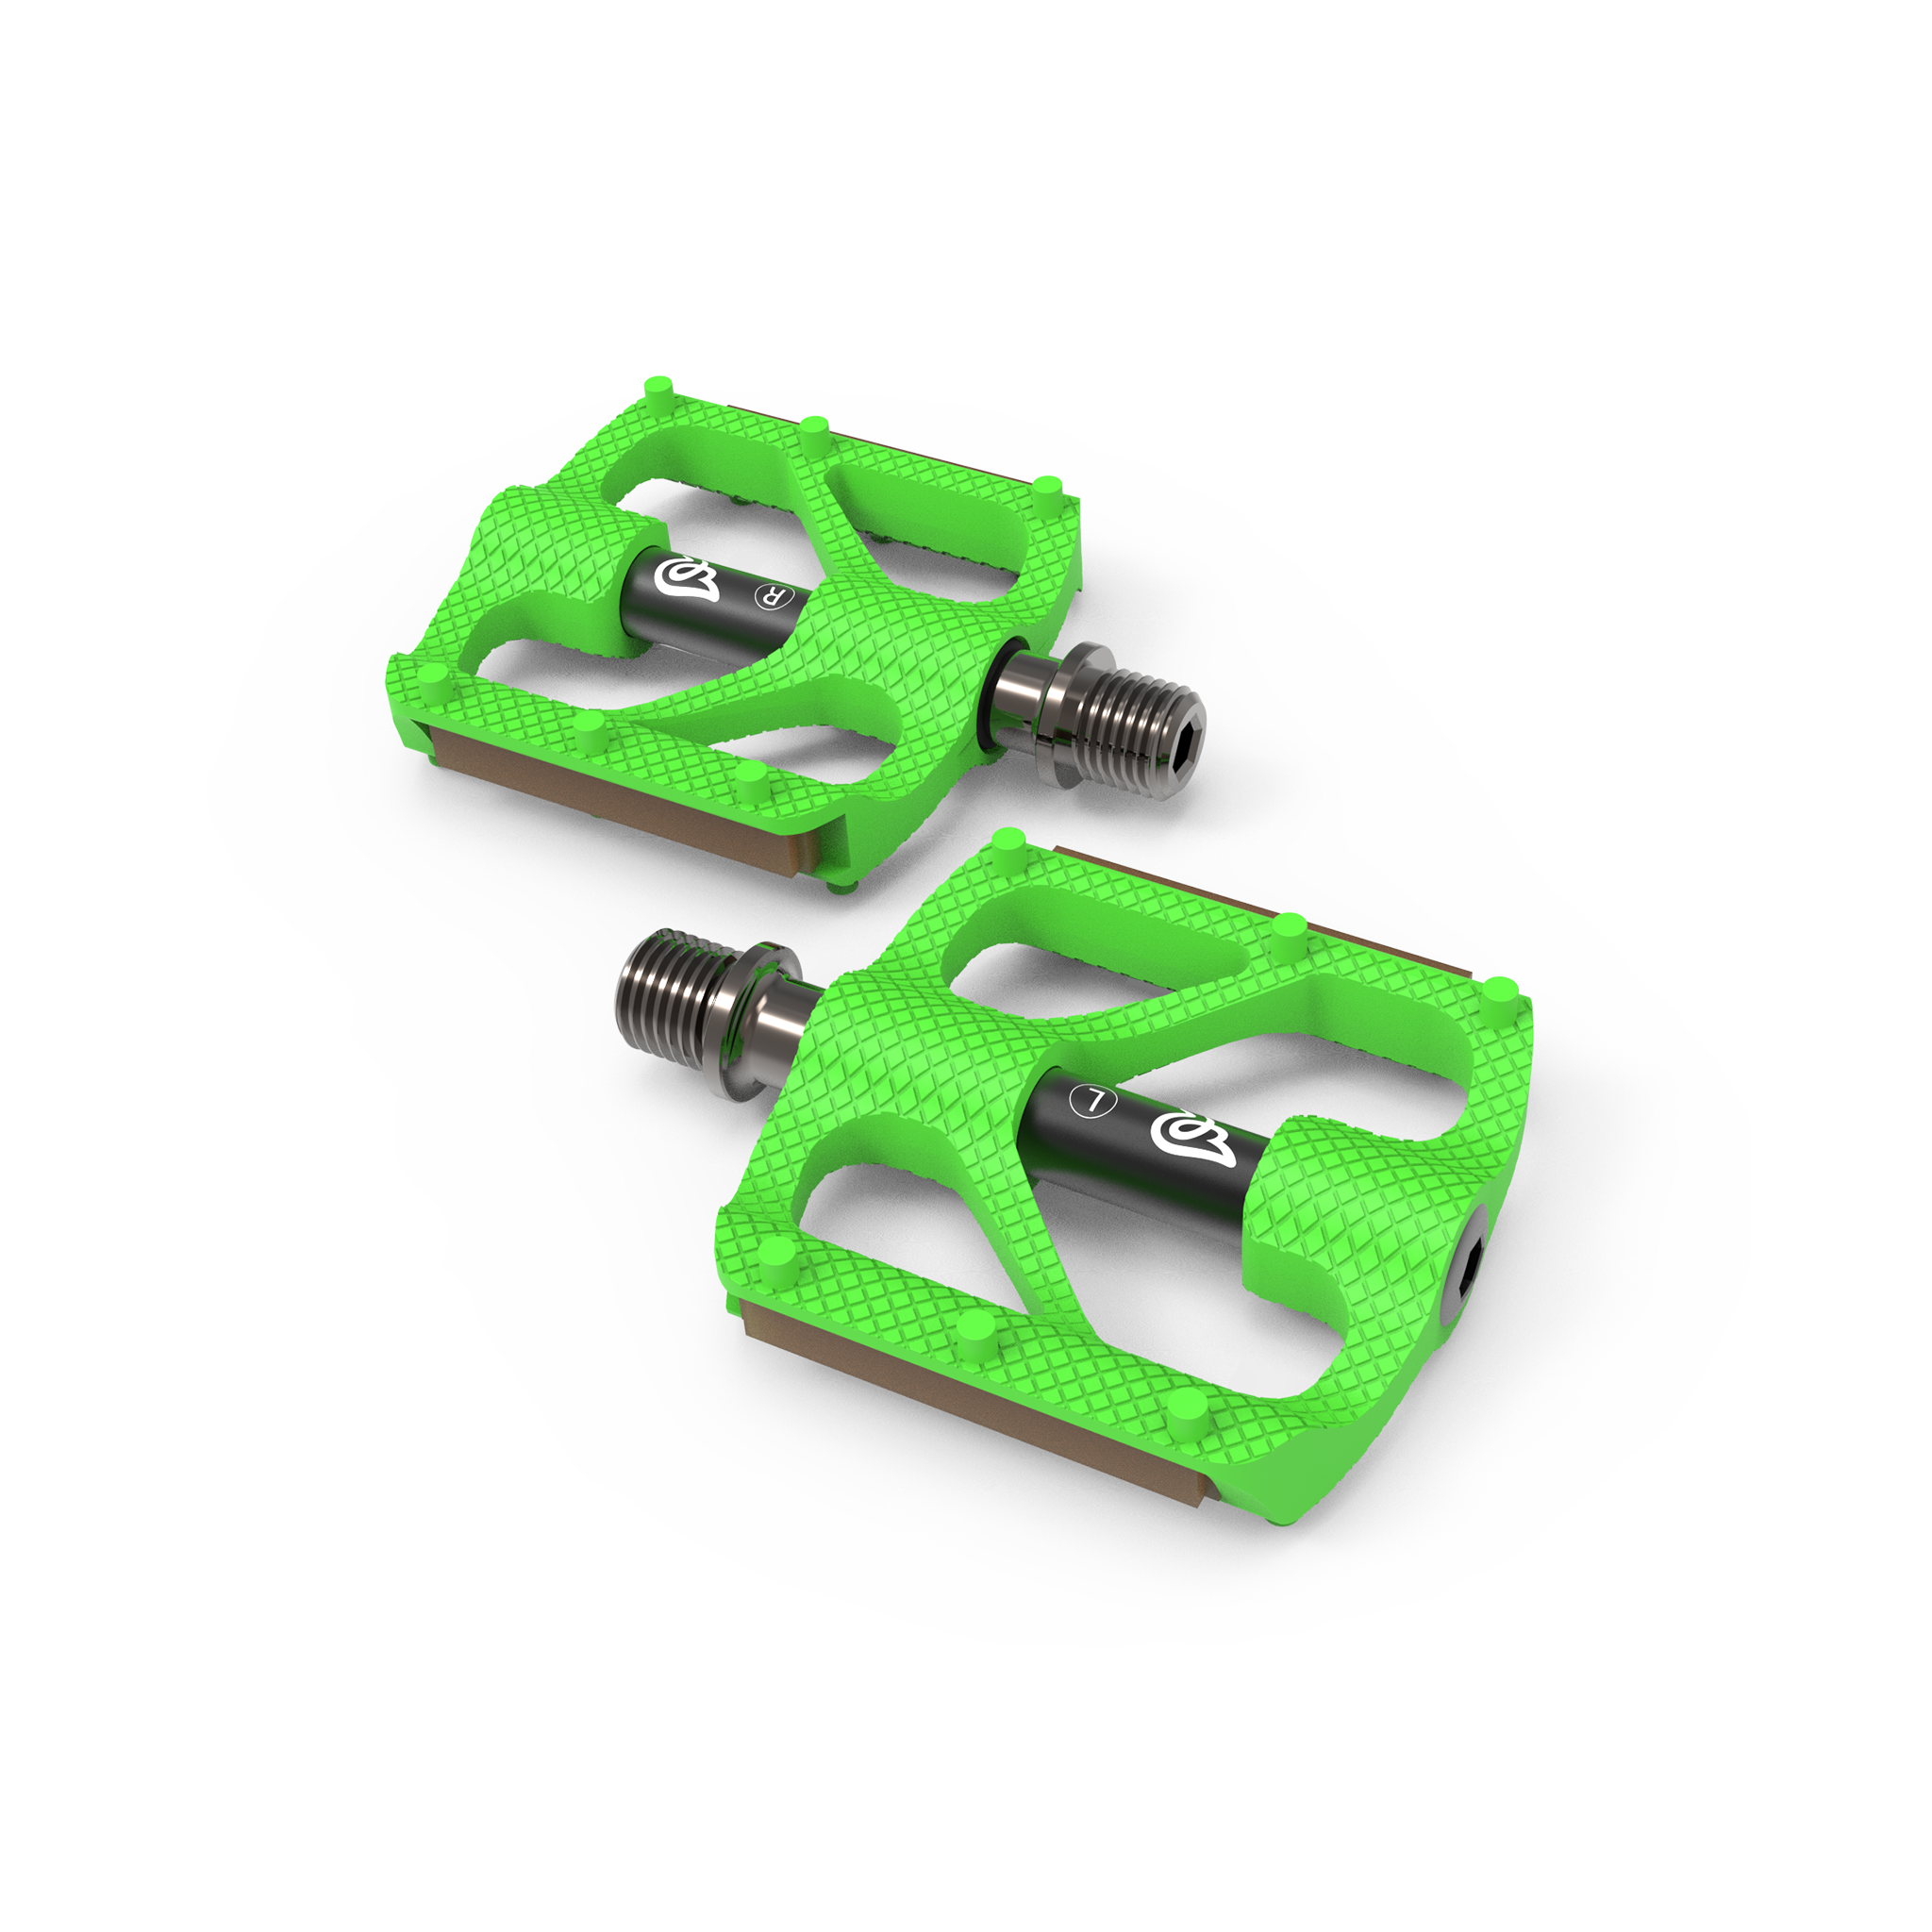 Early Rider P1 Resin Platform Pedals